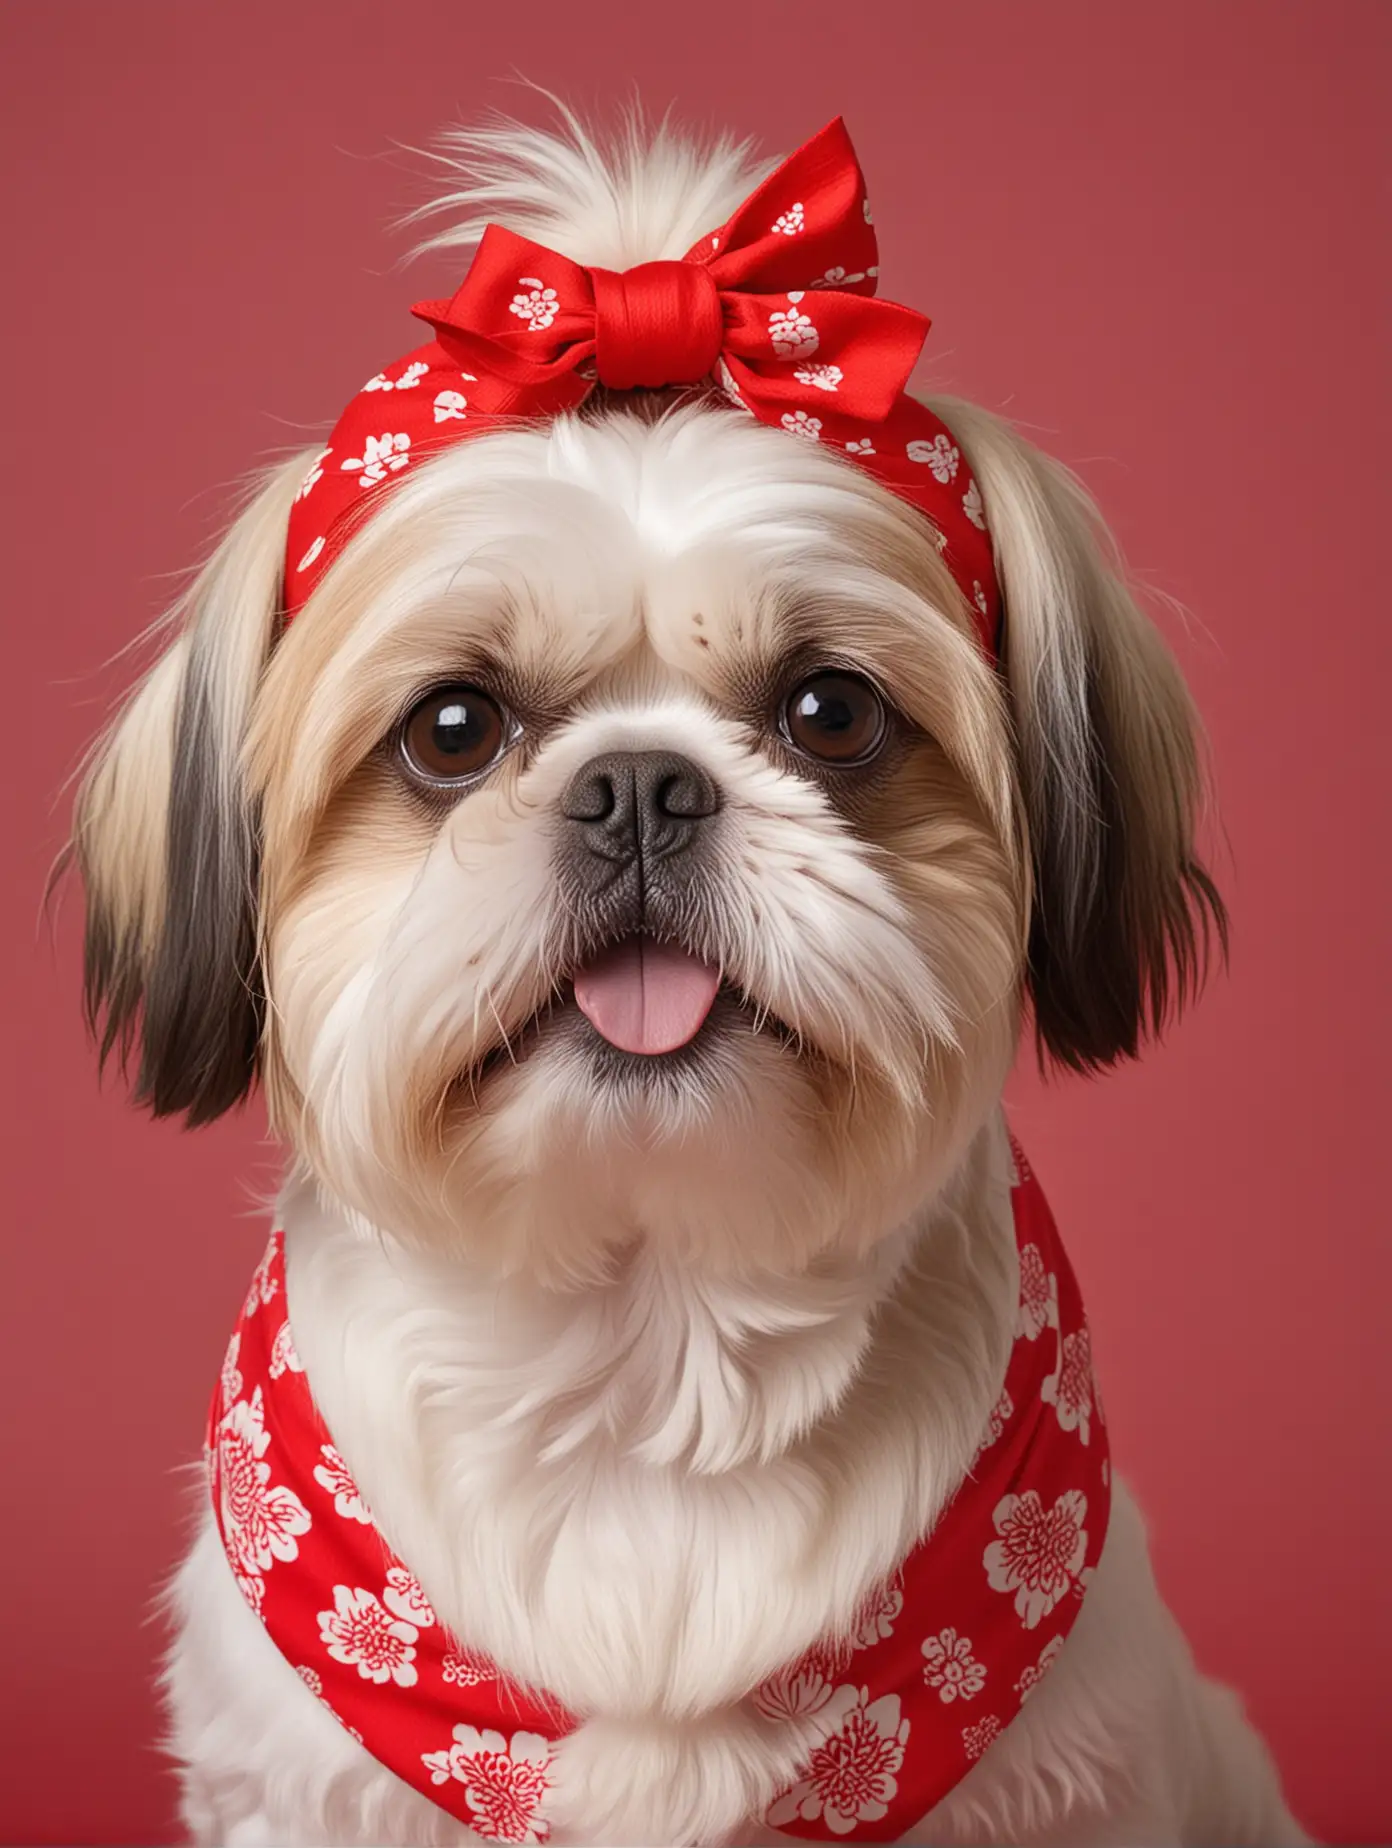 Shih Tzu in Traditional Red Japanese Headband on a